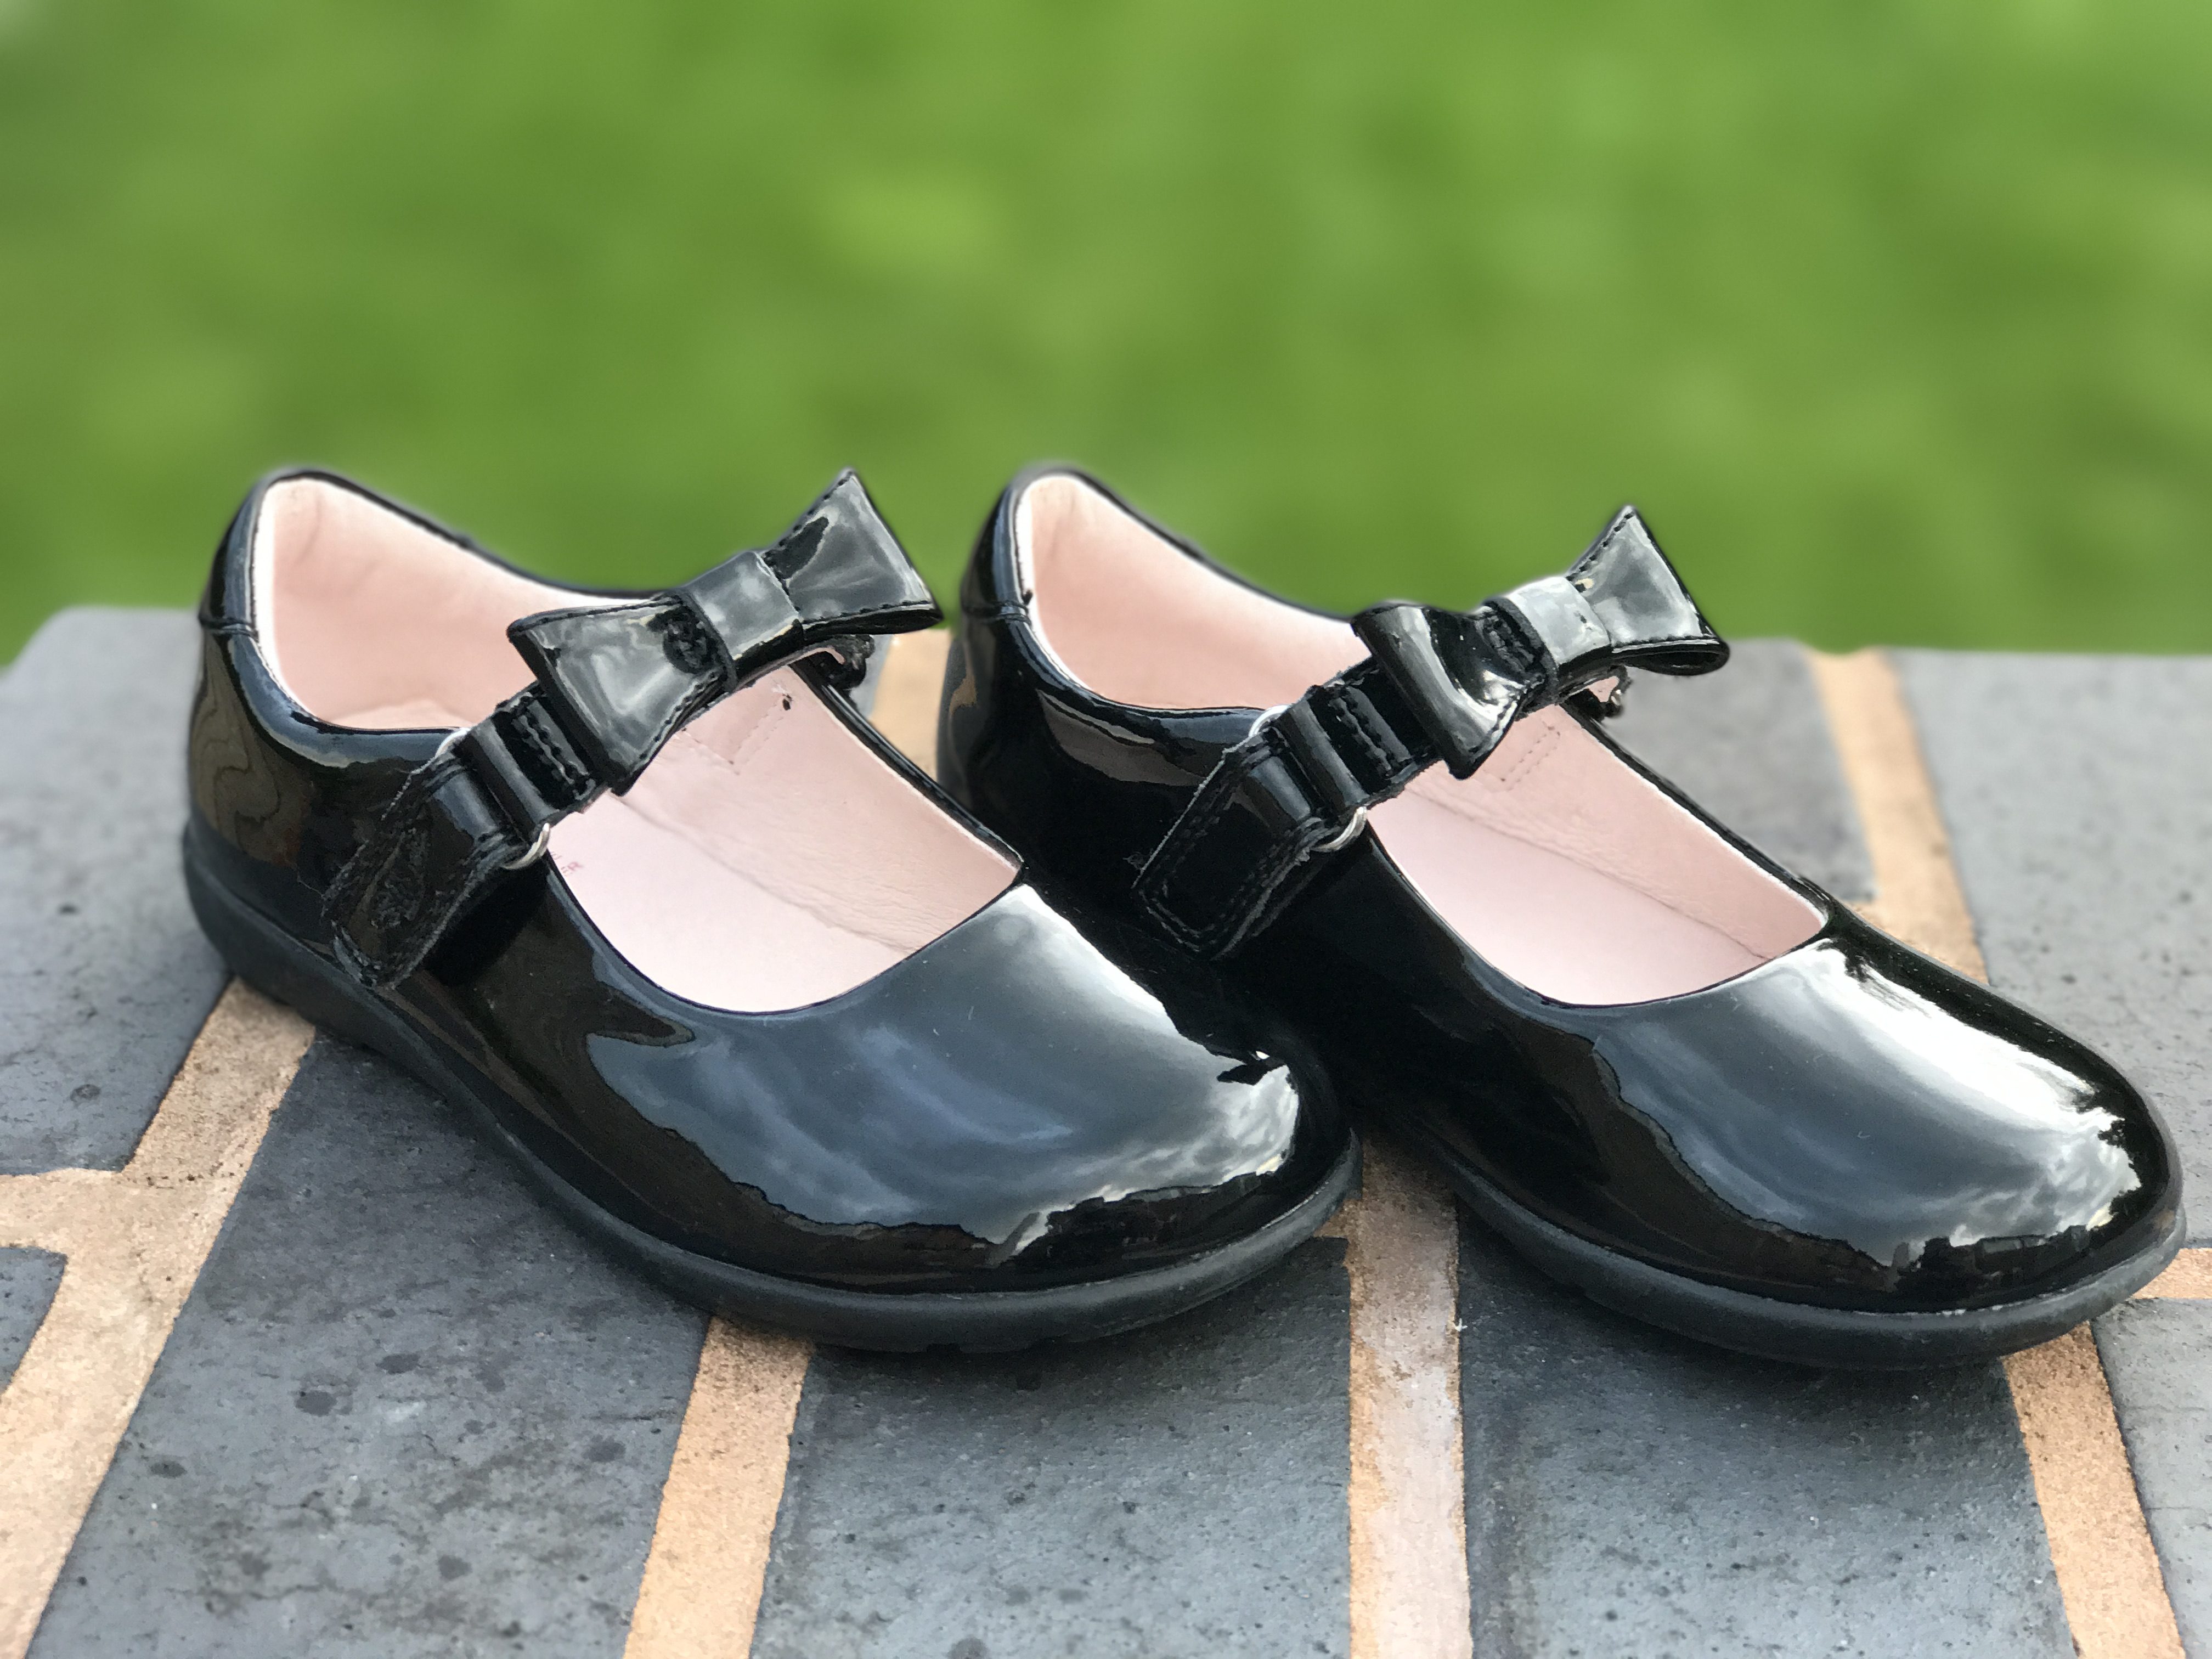 REVIEW – Jakes Shoes Back to School Range